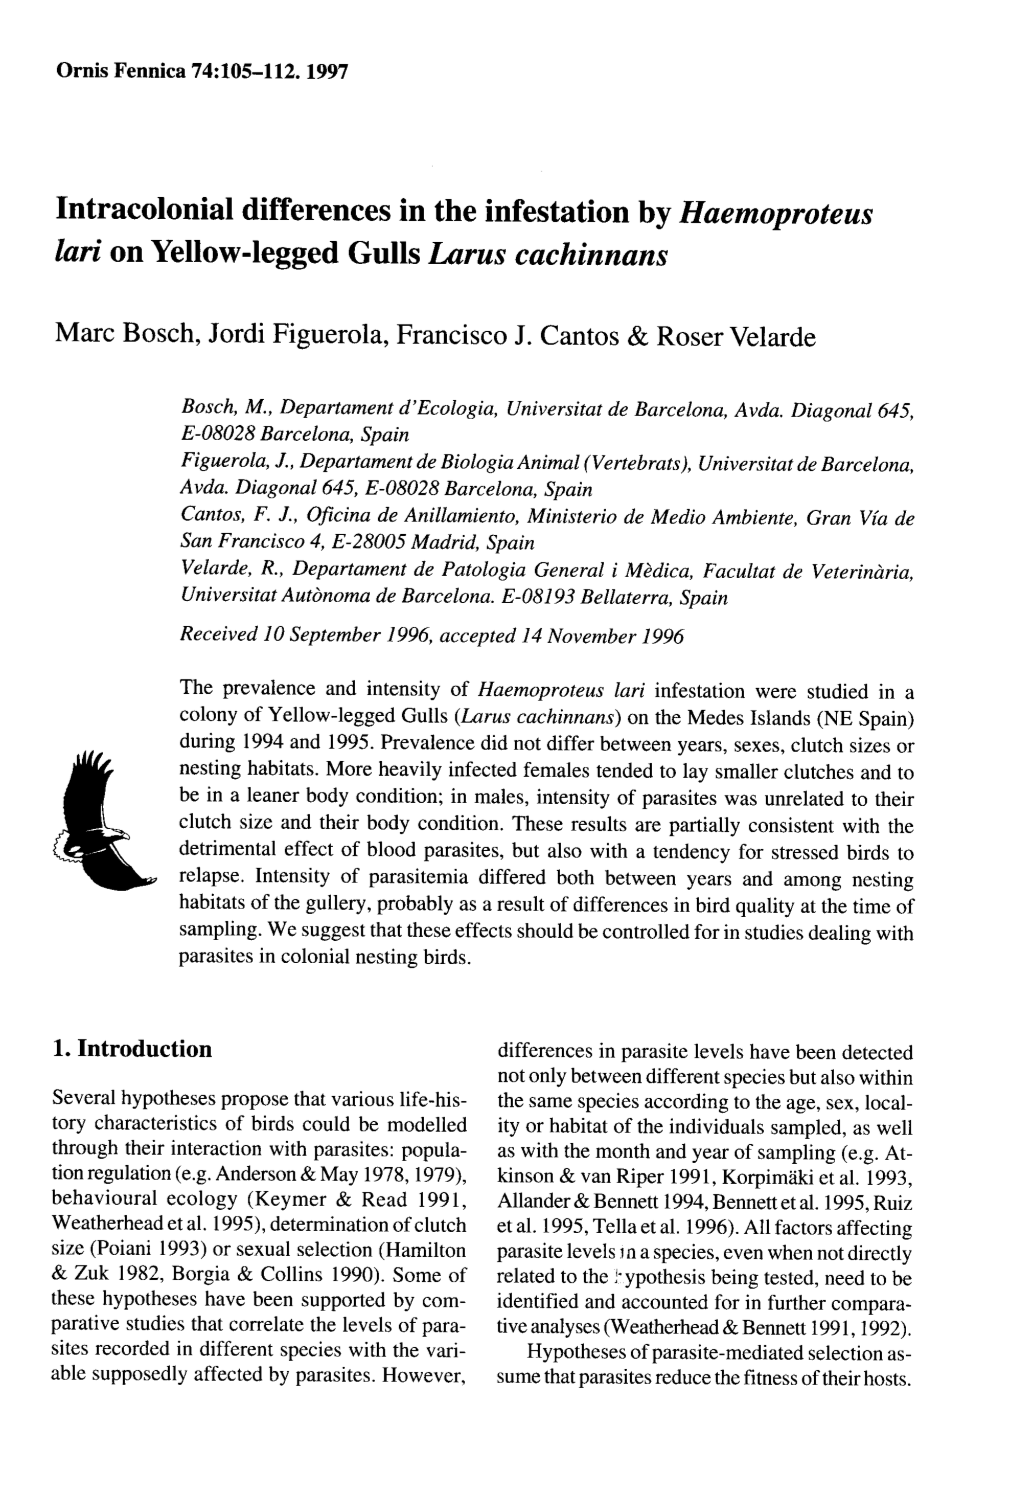 Intracolonial Differences in the Infestation by Haemoproteus Lari on Yellow-Legged Gulls Larus Cachinnans